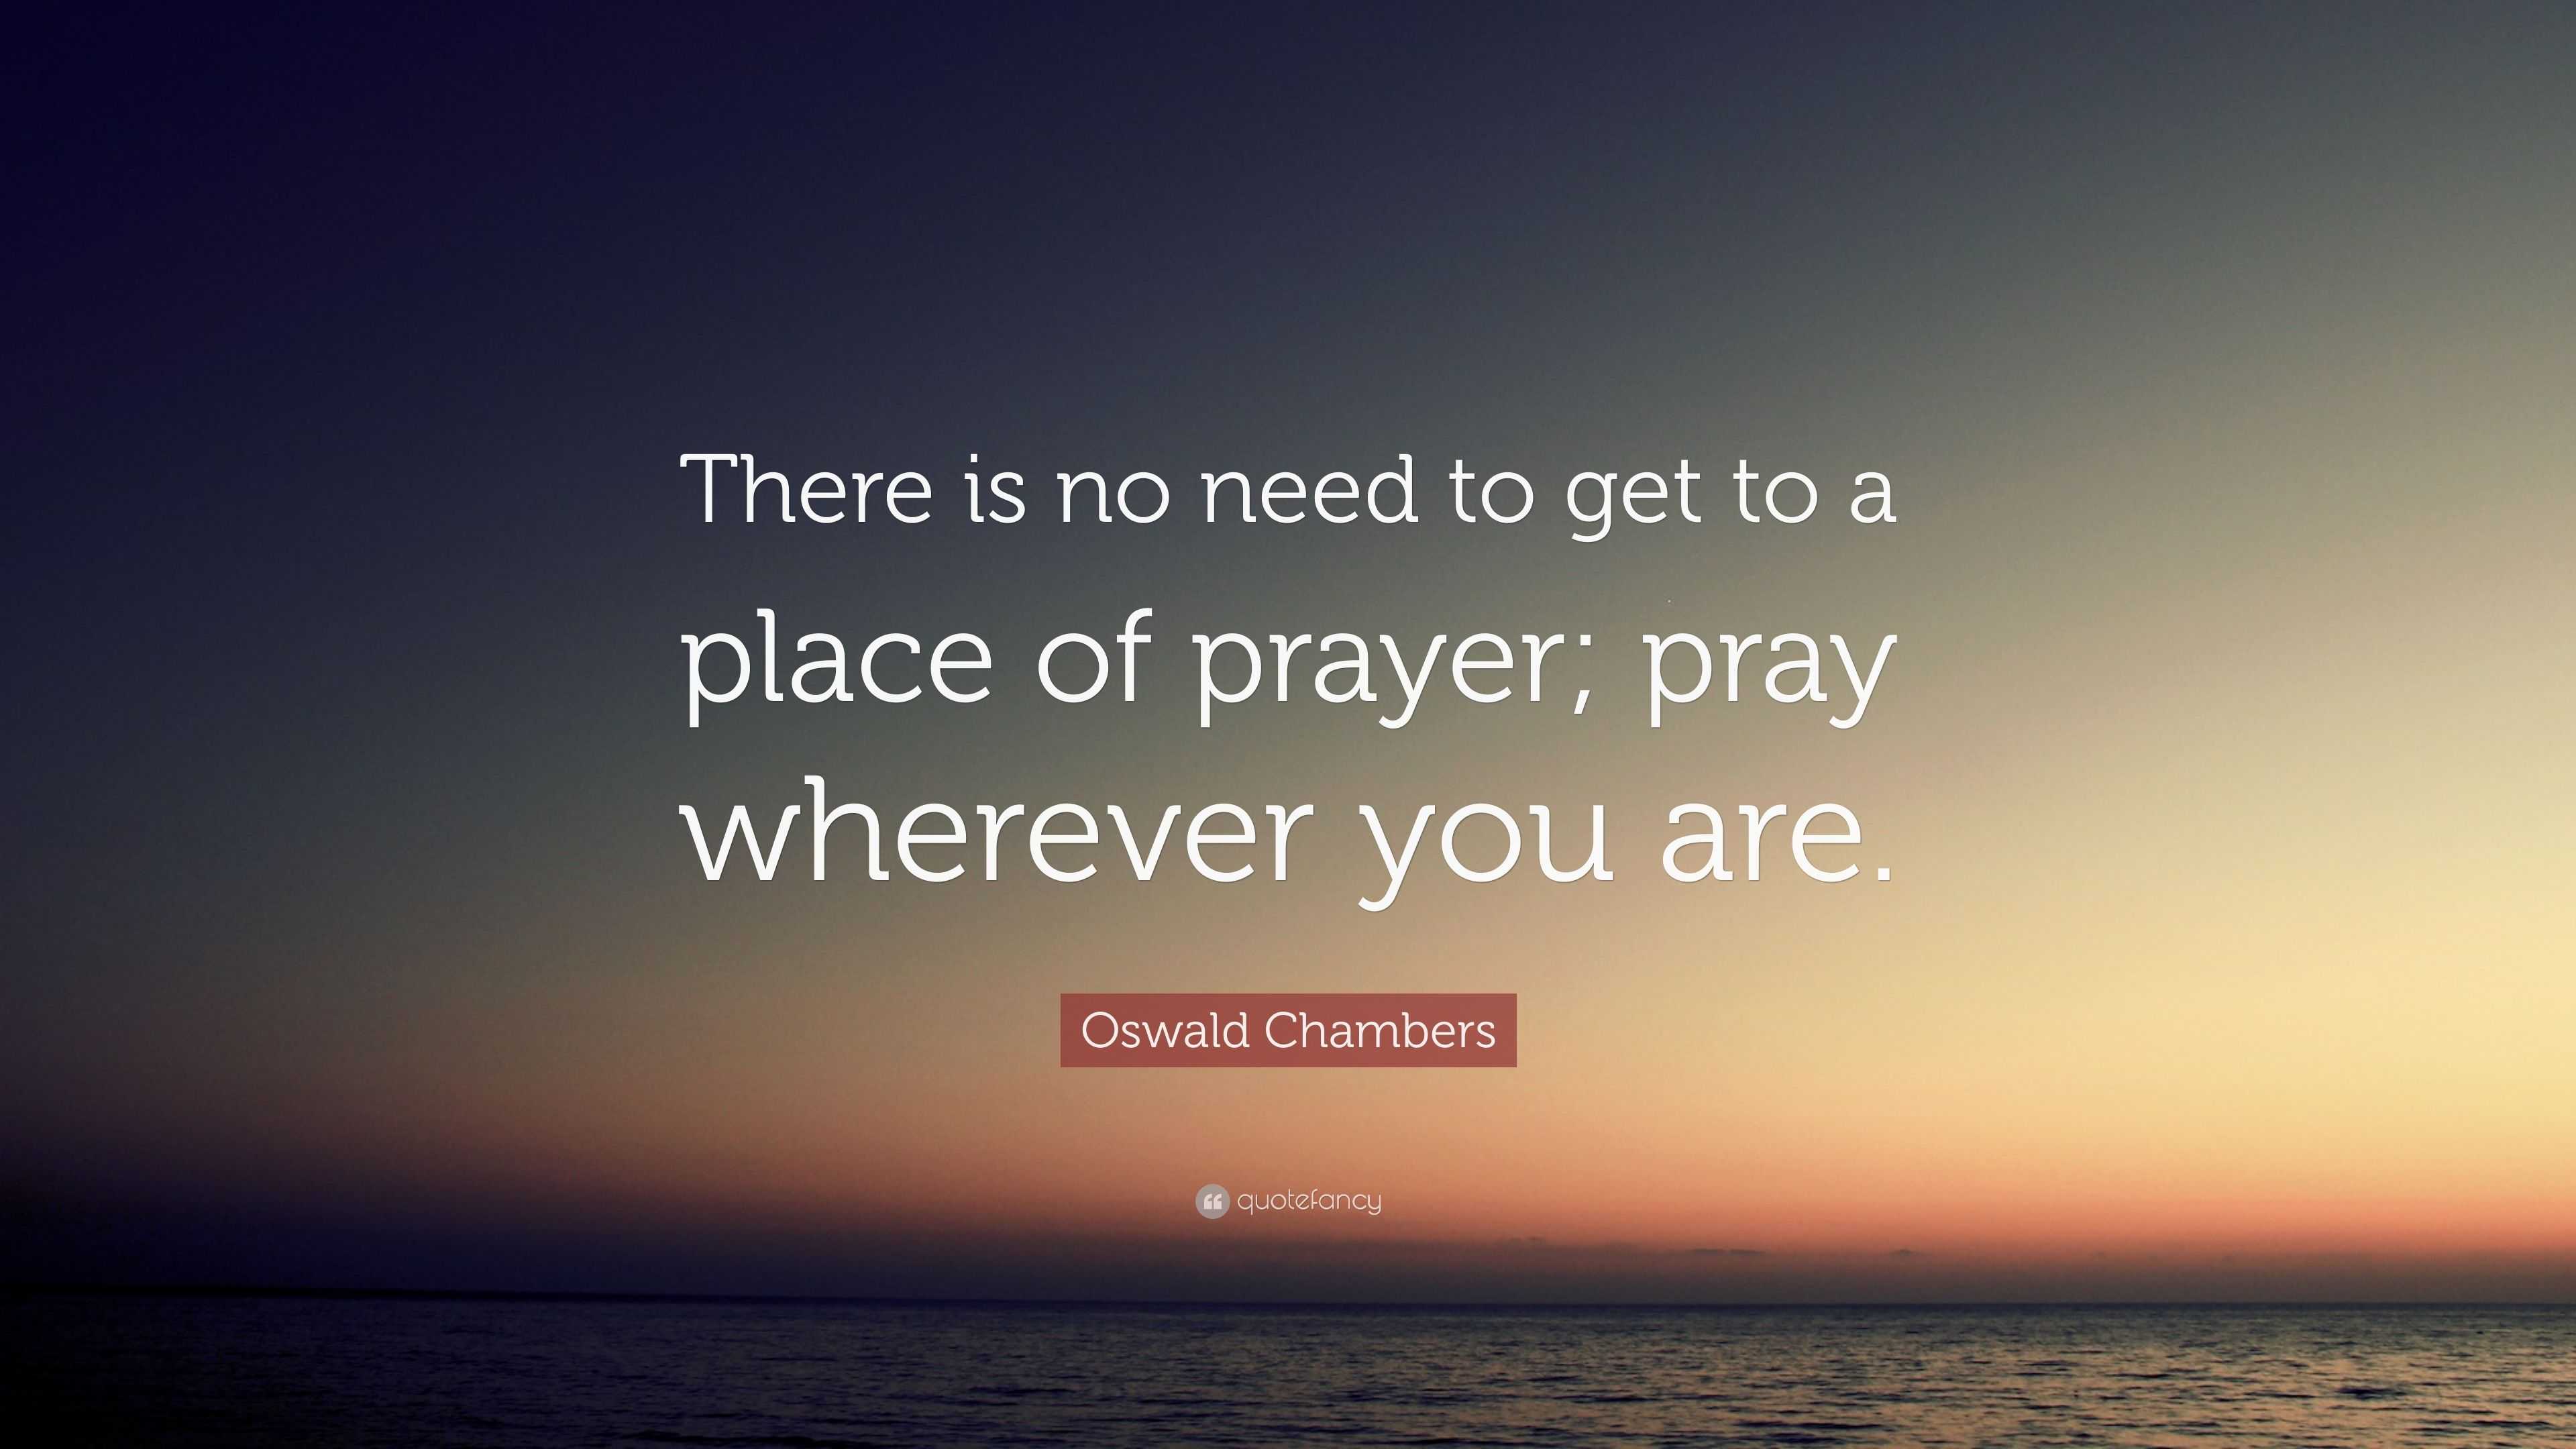 Oswald Chambers Quote: “There is no need to get to a place of prayer ...